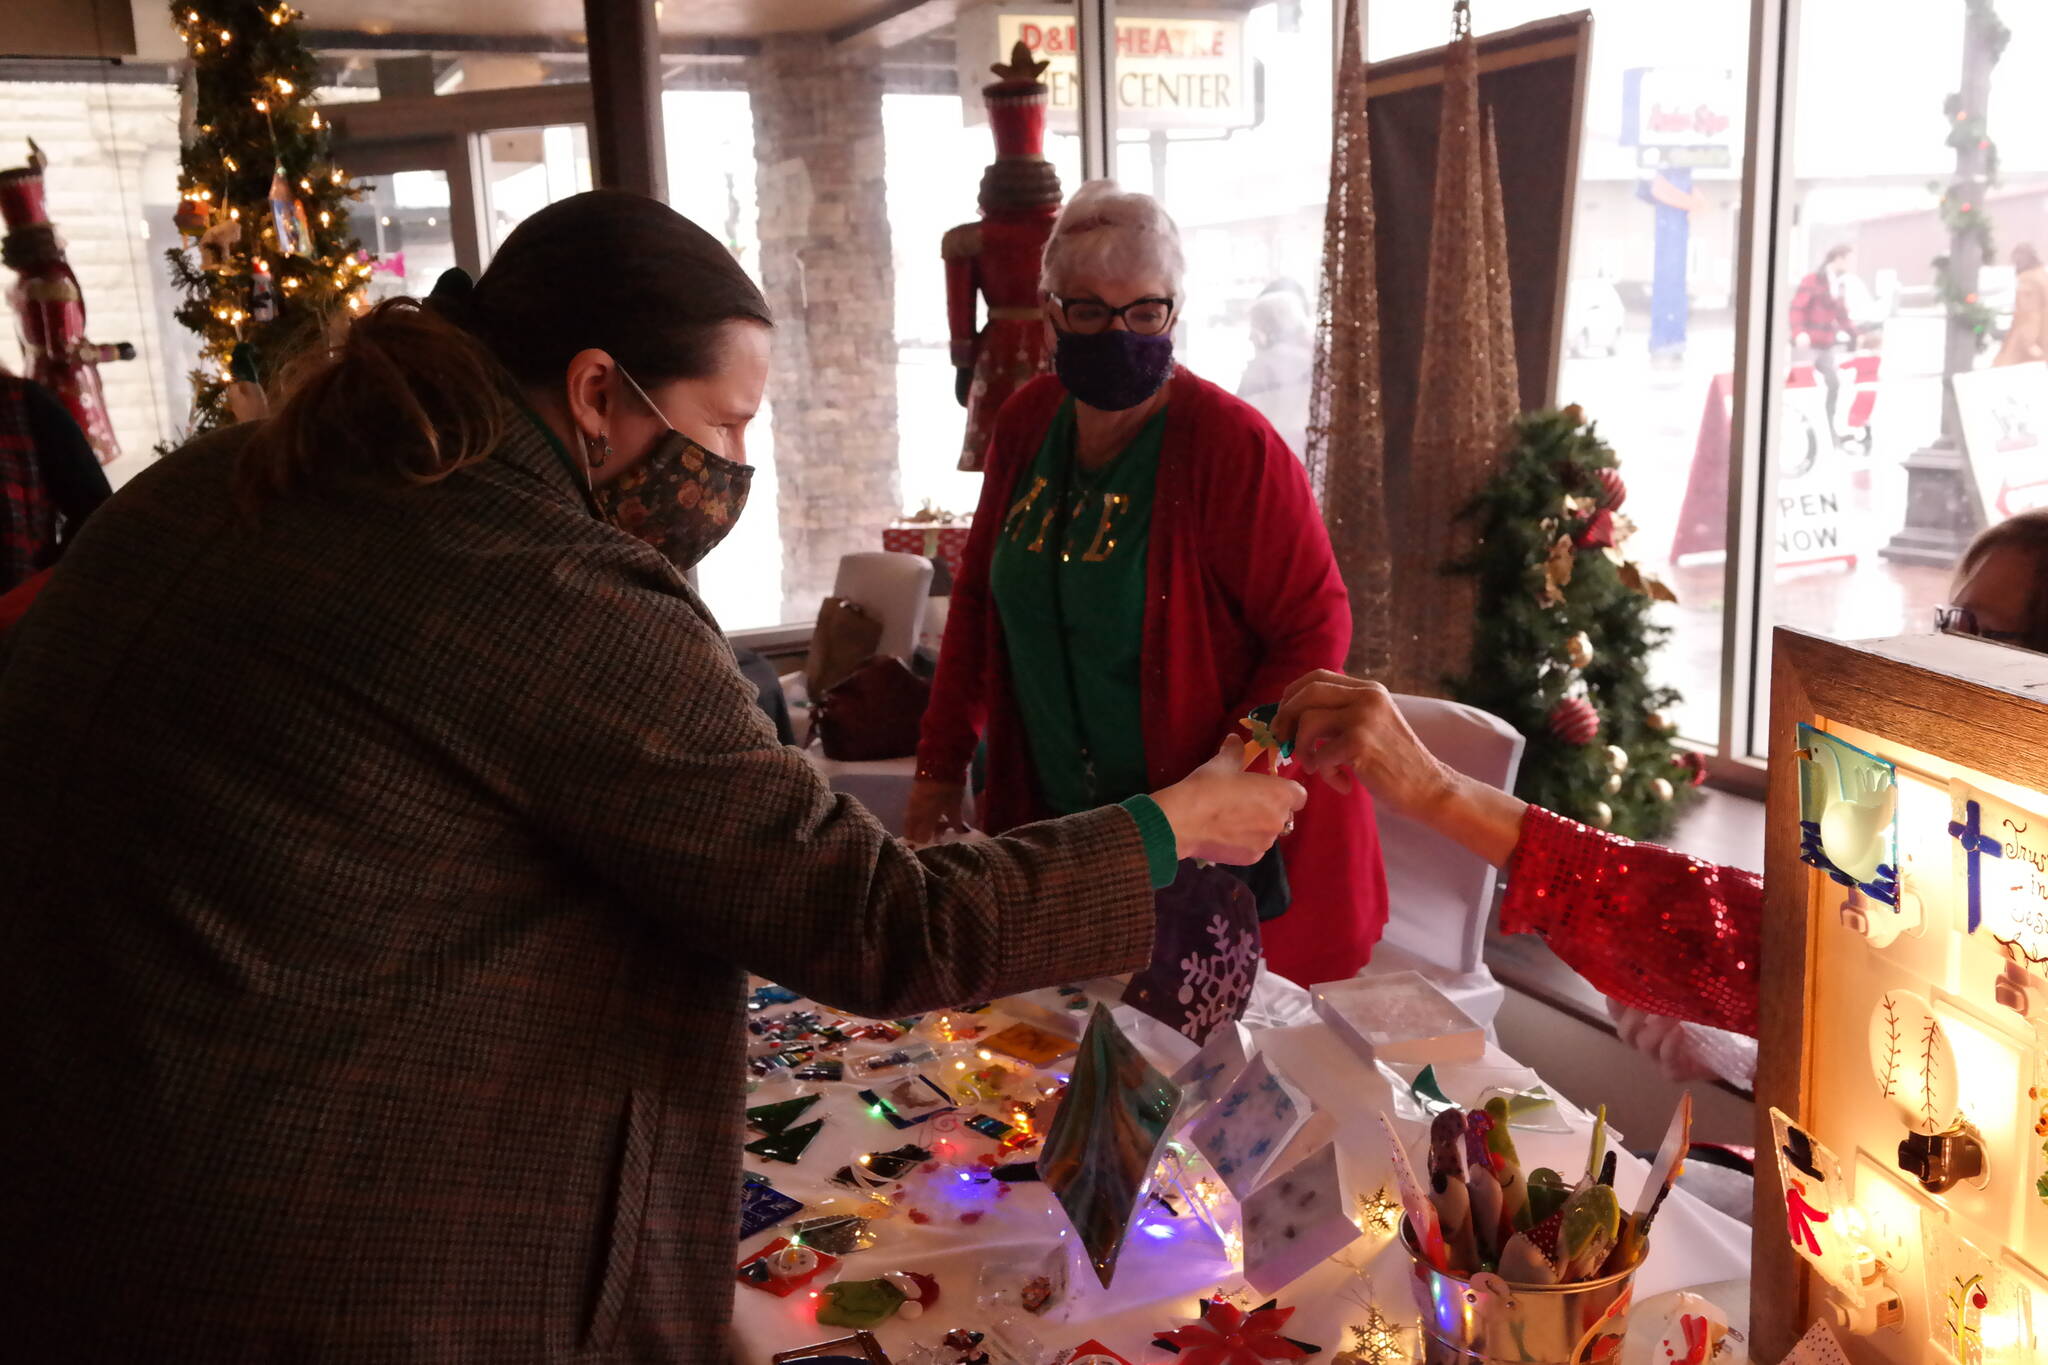 photos by Erika Gebhardt | The Daily World
ABOVE: More than 30 local vendors took over the D&R Theatre Event Center on Saturday, Dec. 3, 2021, for WinterFest. BELOW: A gingerbread house.